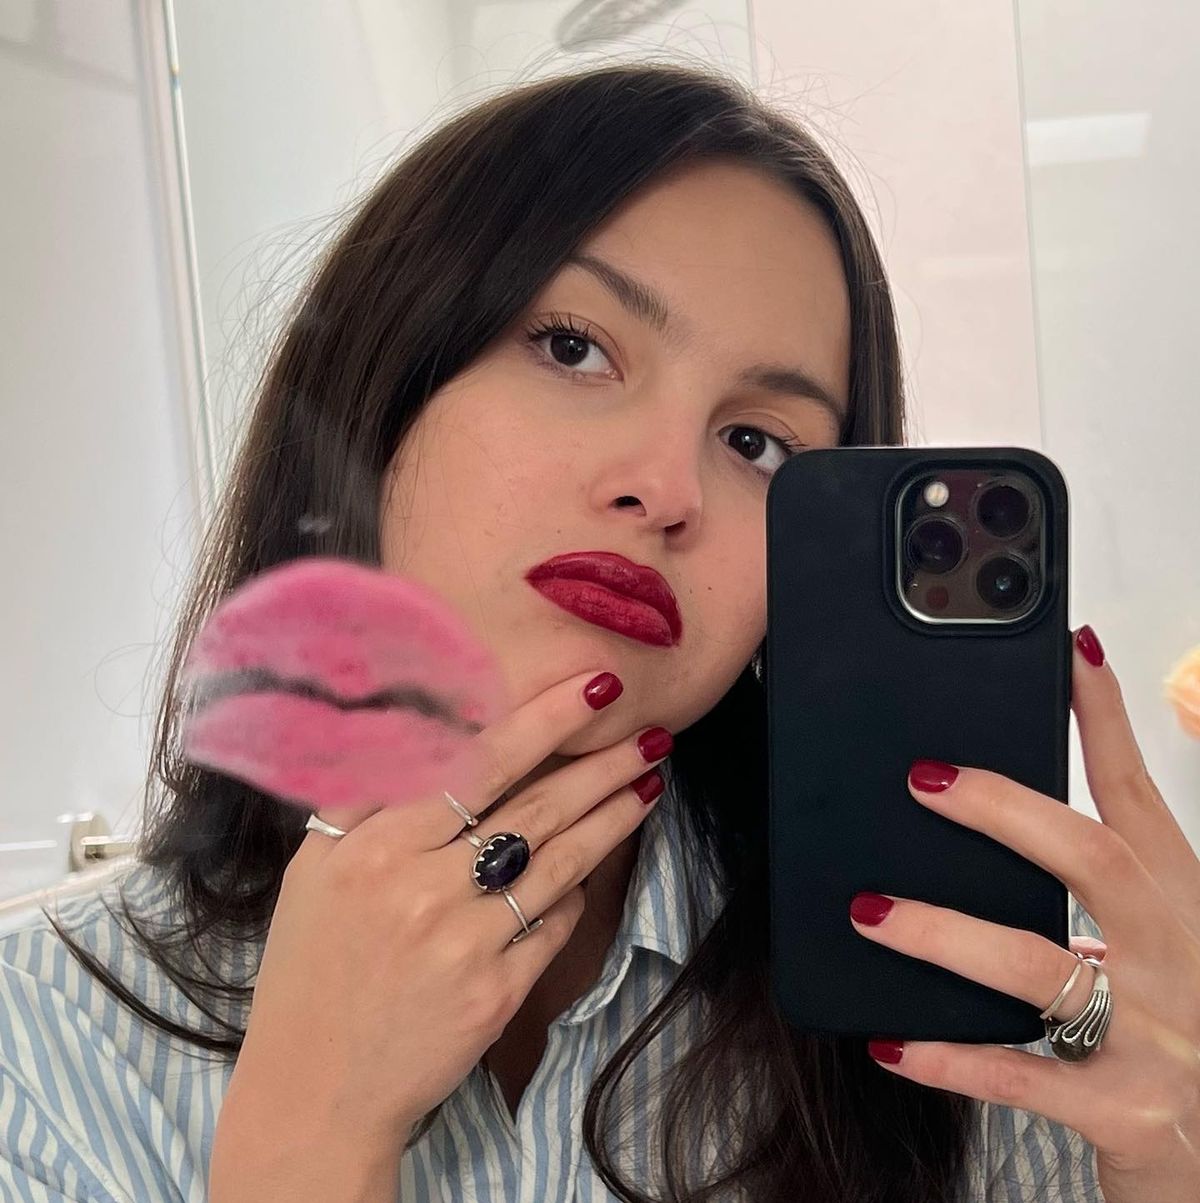 Welcoming Halloween with the Vampire Nail Trend Taking TikTok by Storm